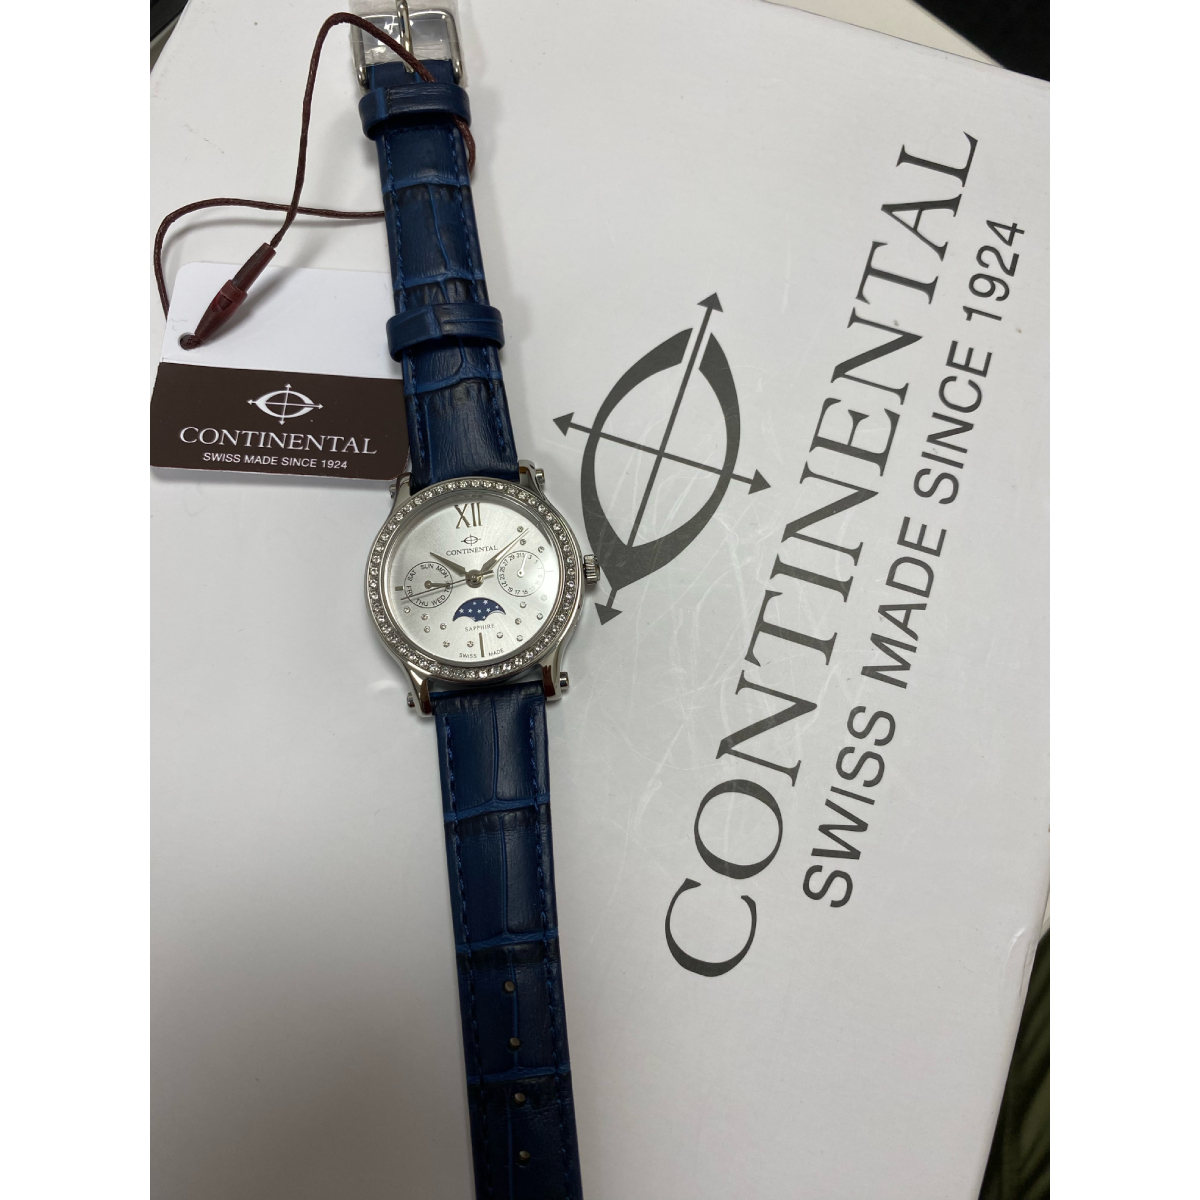 CONTINENTAL MOONPHASE WATCH 20505-LM158111.002